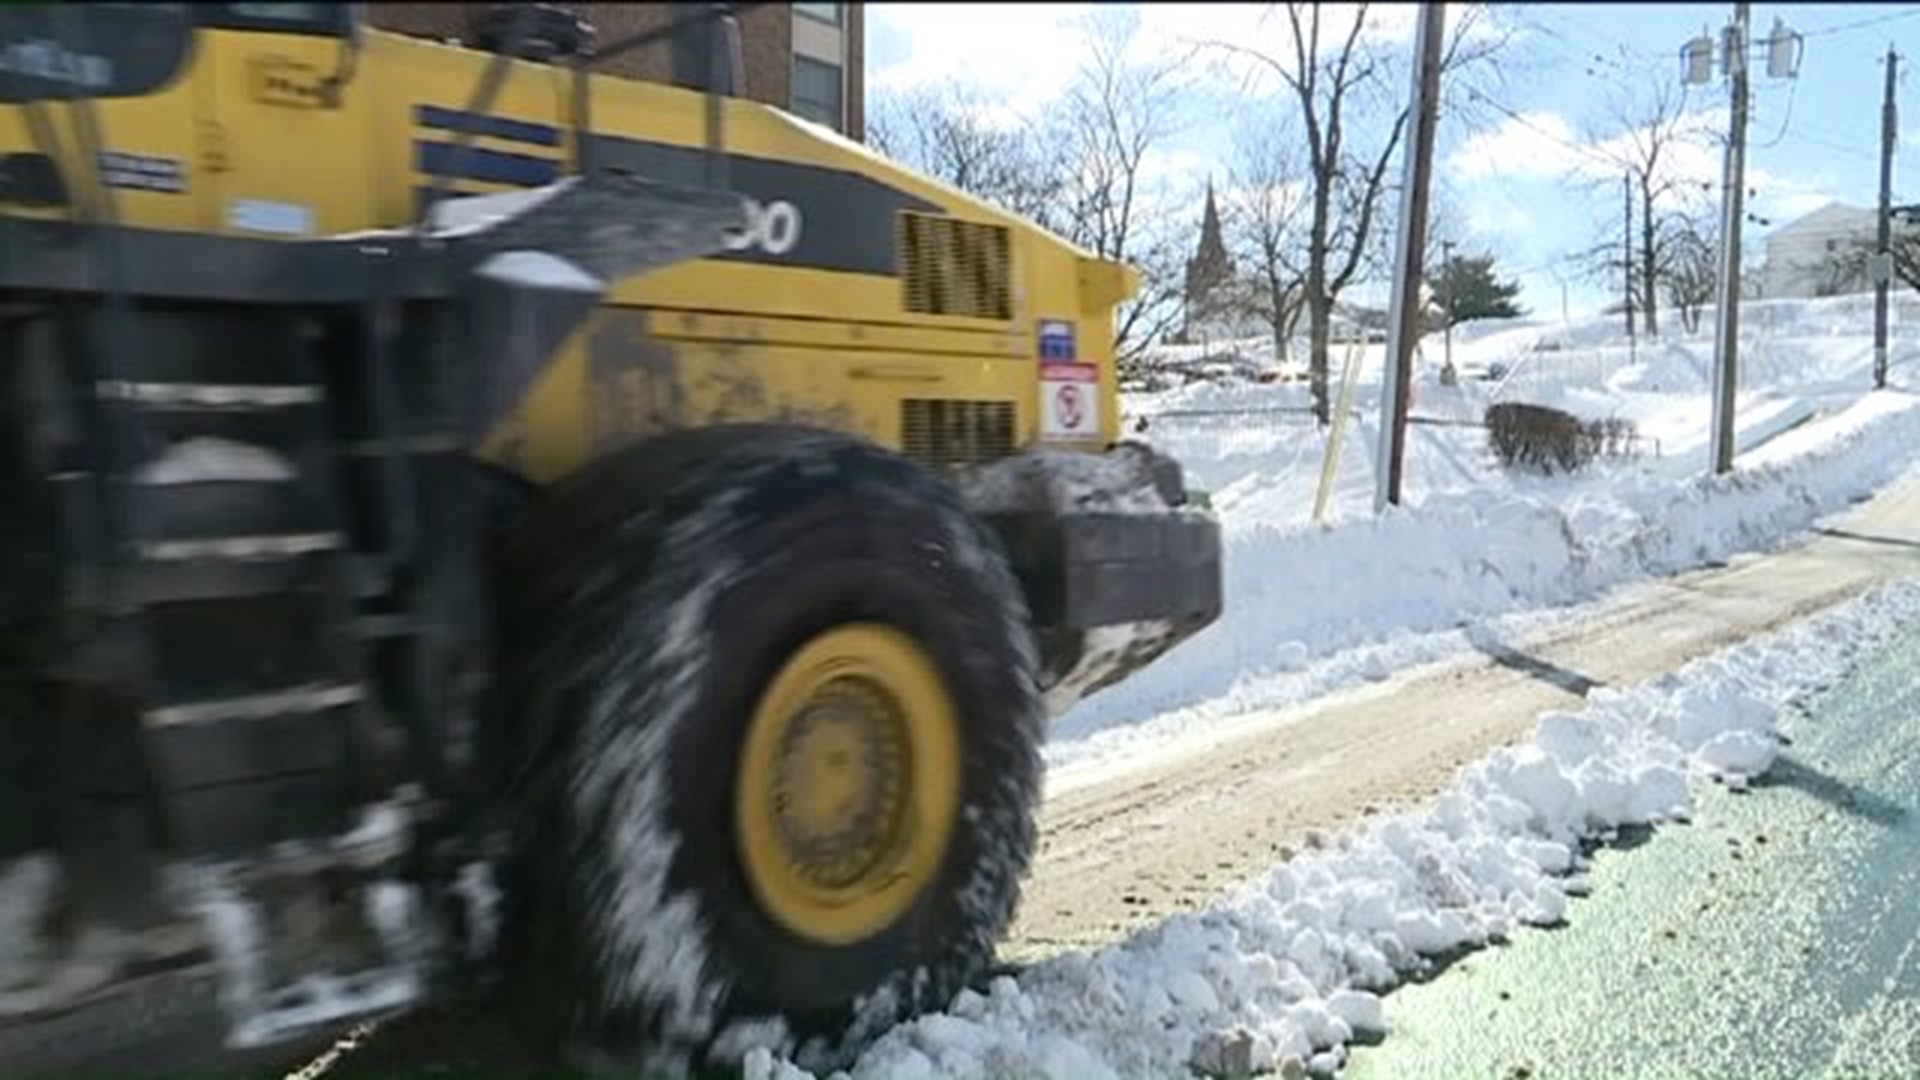 Snow Removal Continues in Nanticoke